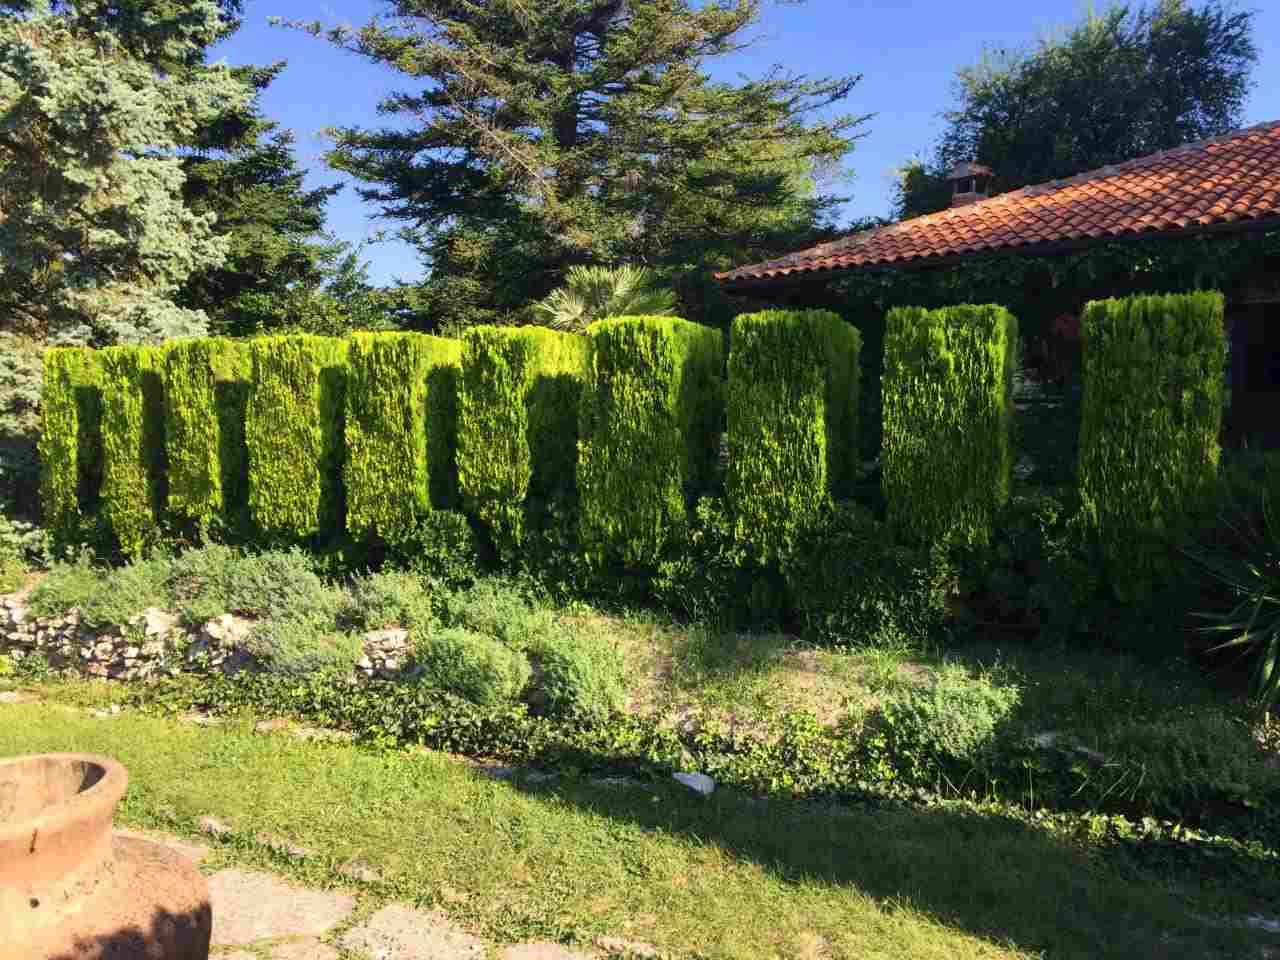 Formal clipped hedge